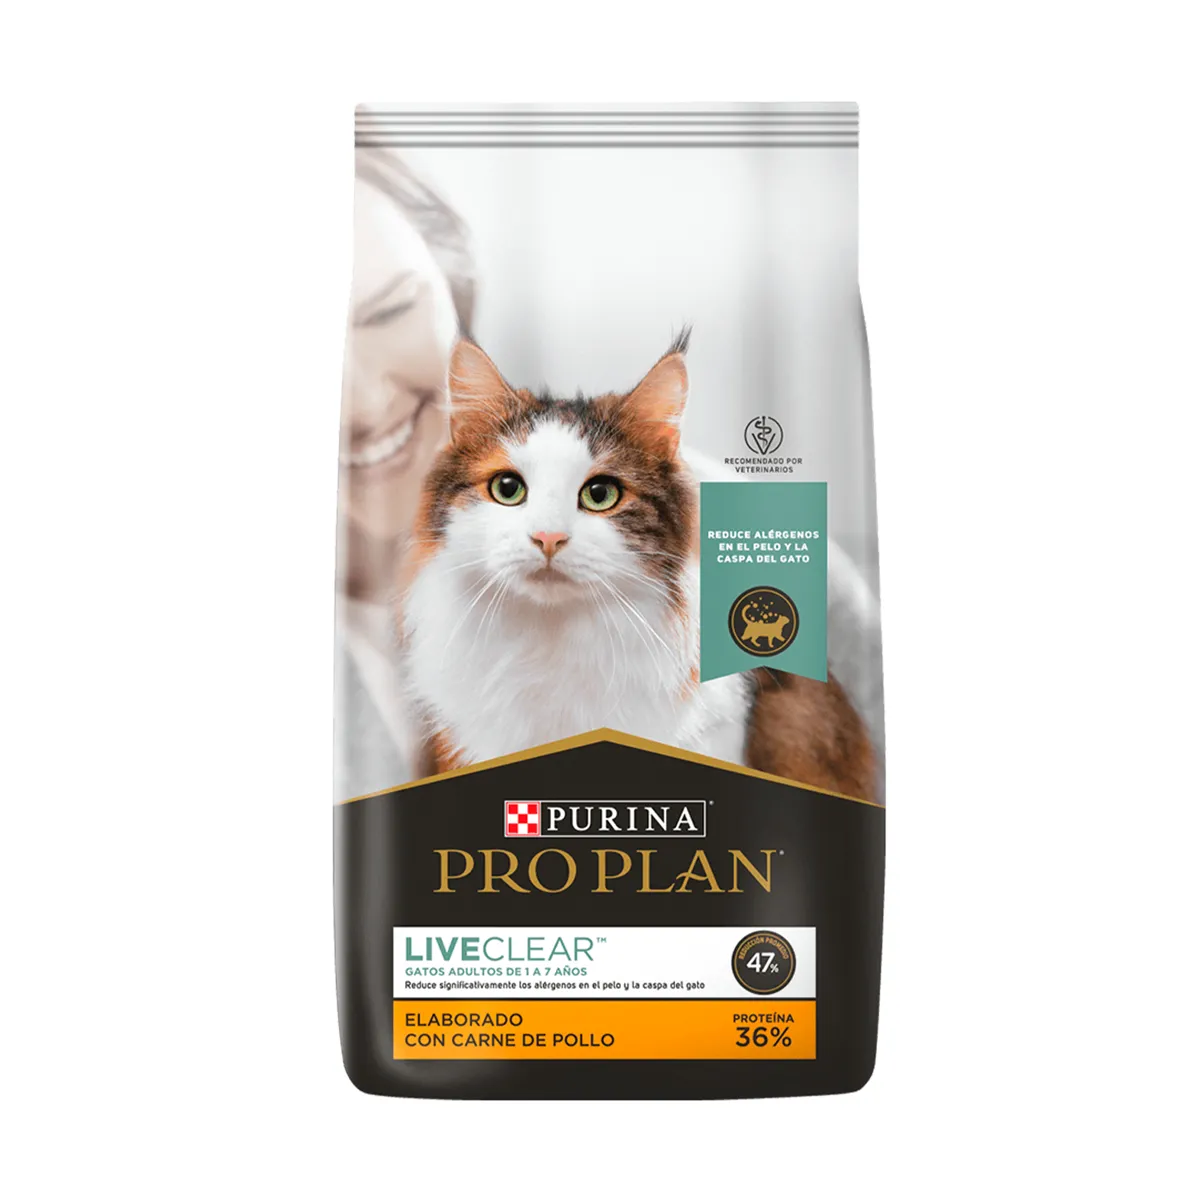 ProPlan-Liveclear-01